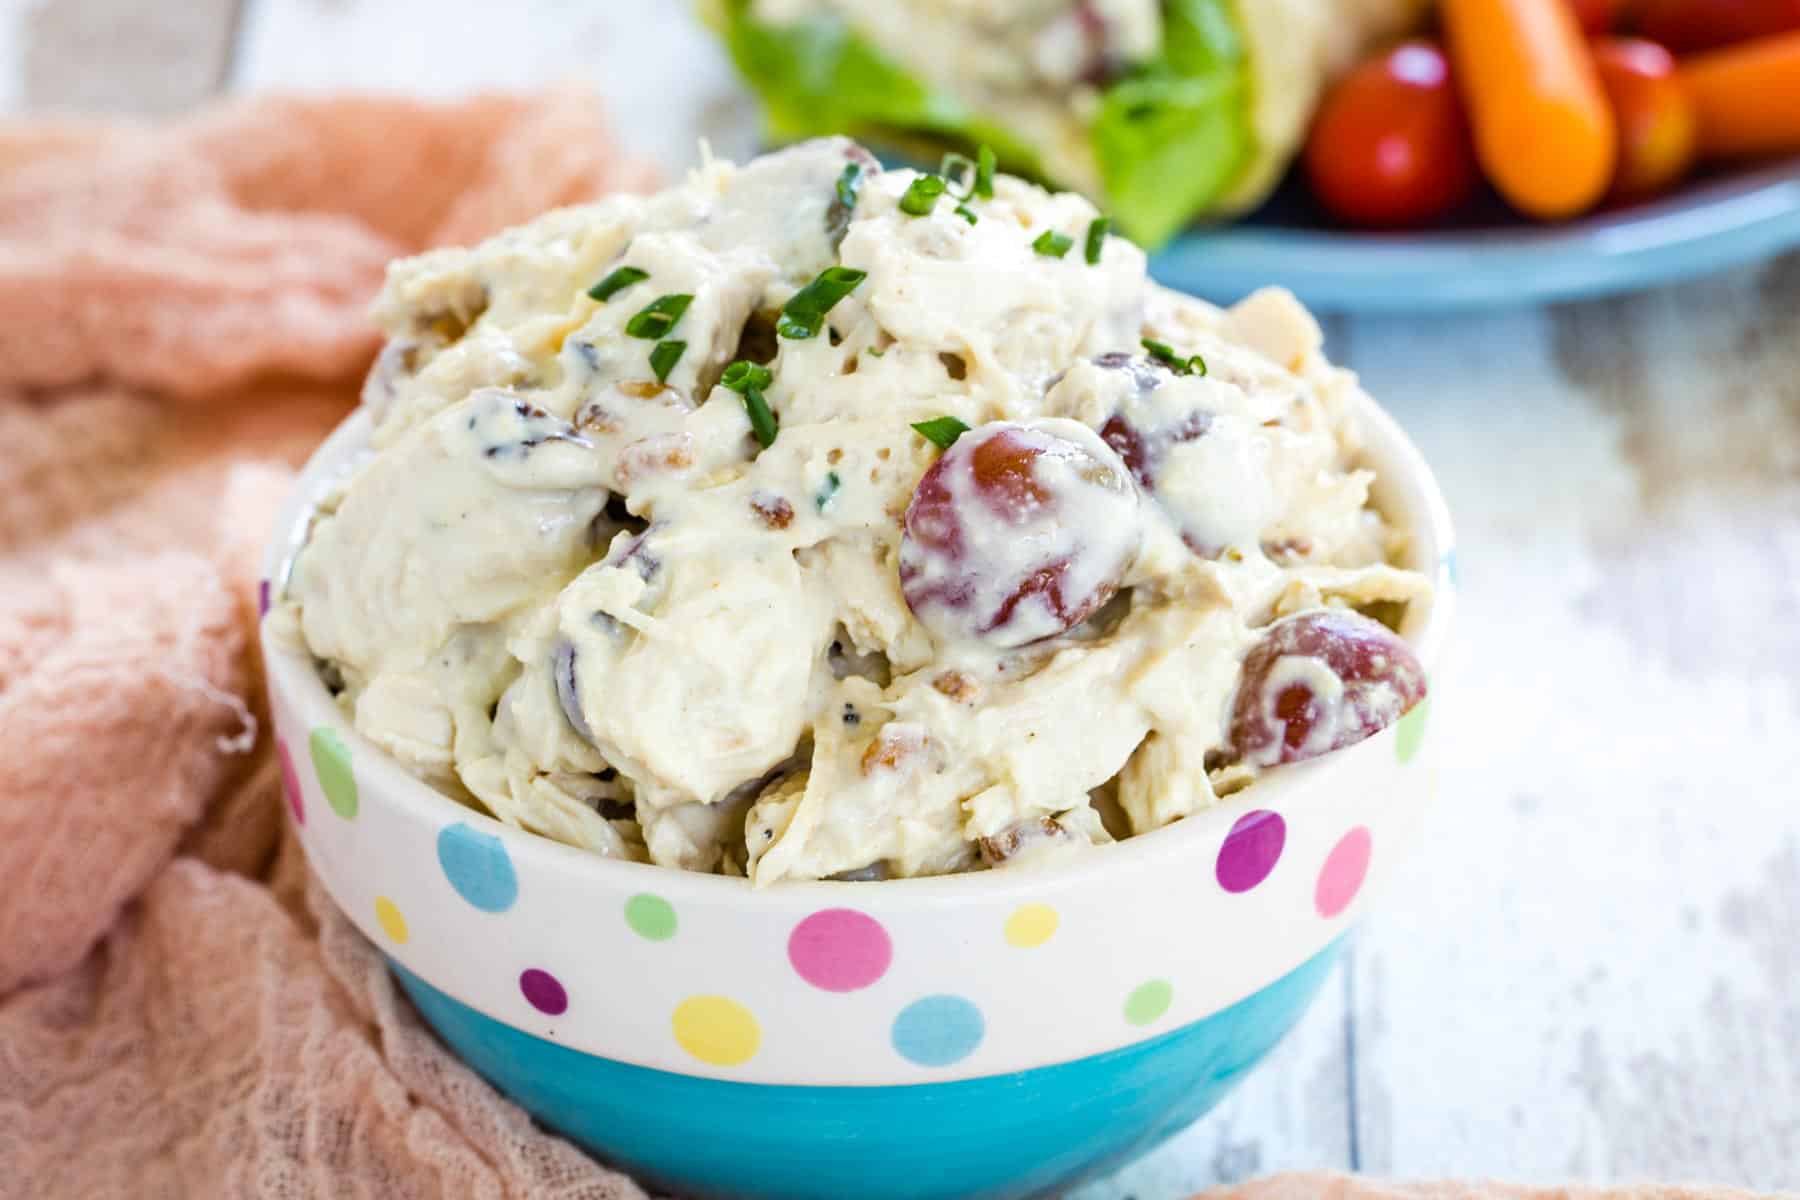 A decorative blue bowl filled with chicken salad garnished with chives.